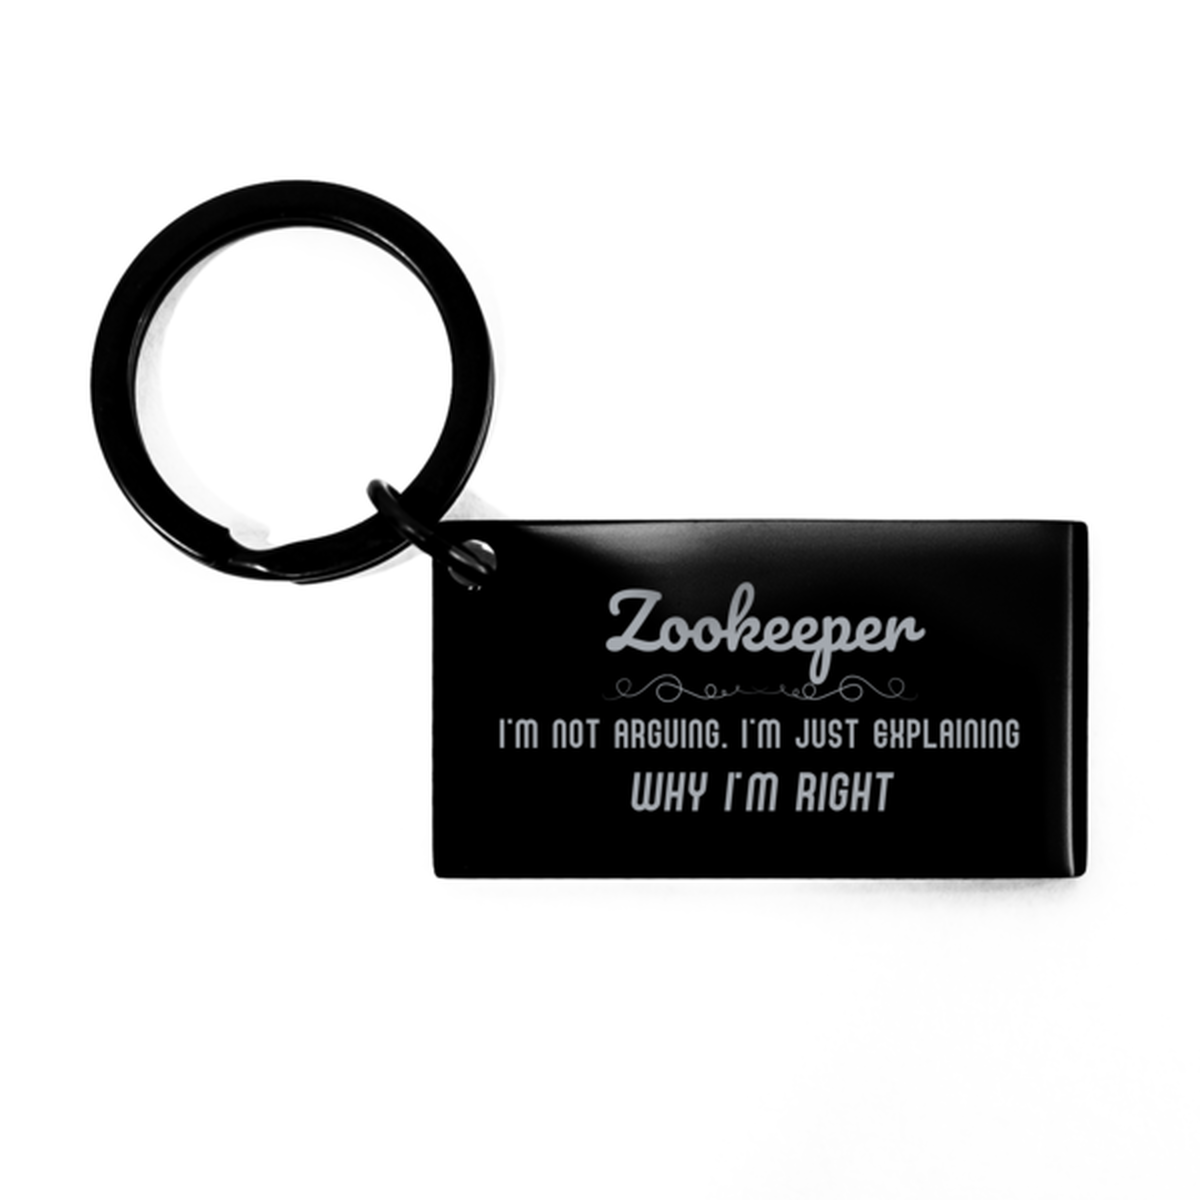 Zookeeper I'm not Arguing. I'm Just Explaining Why I'm RIGHT Keychain, Funny Saying Quote Zookeeper Gifts For Zookeeper Graduation Birthday Christmas Gifts for Men Women Coworker